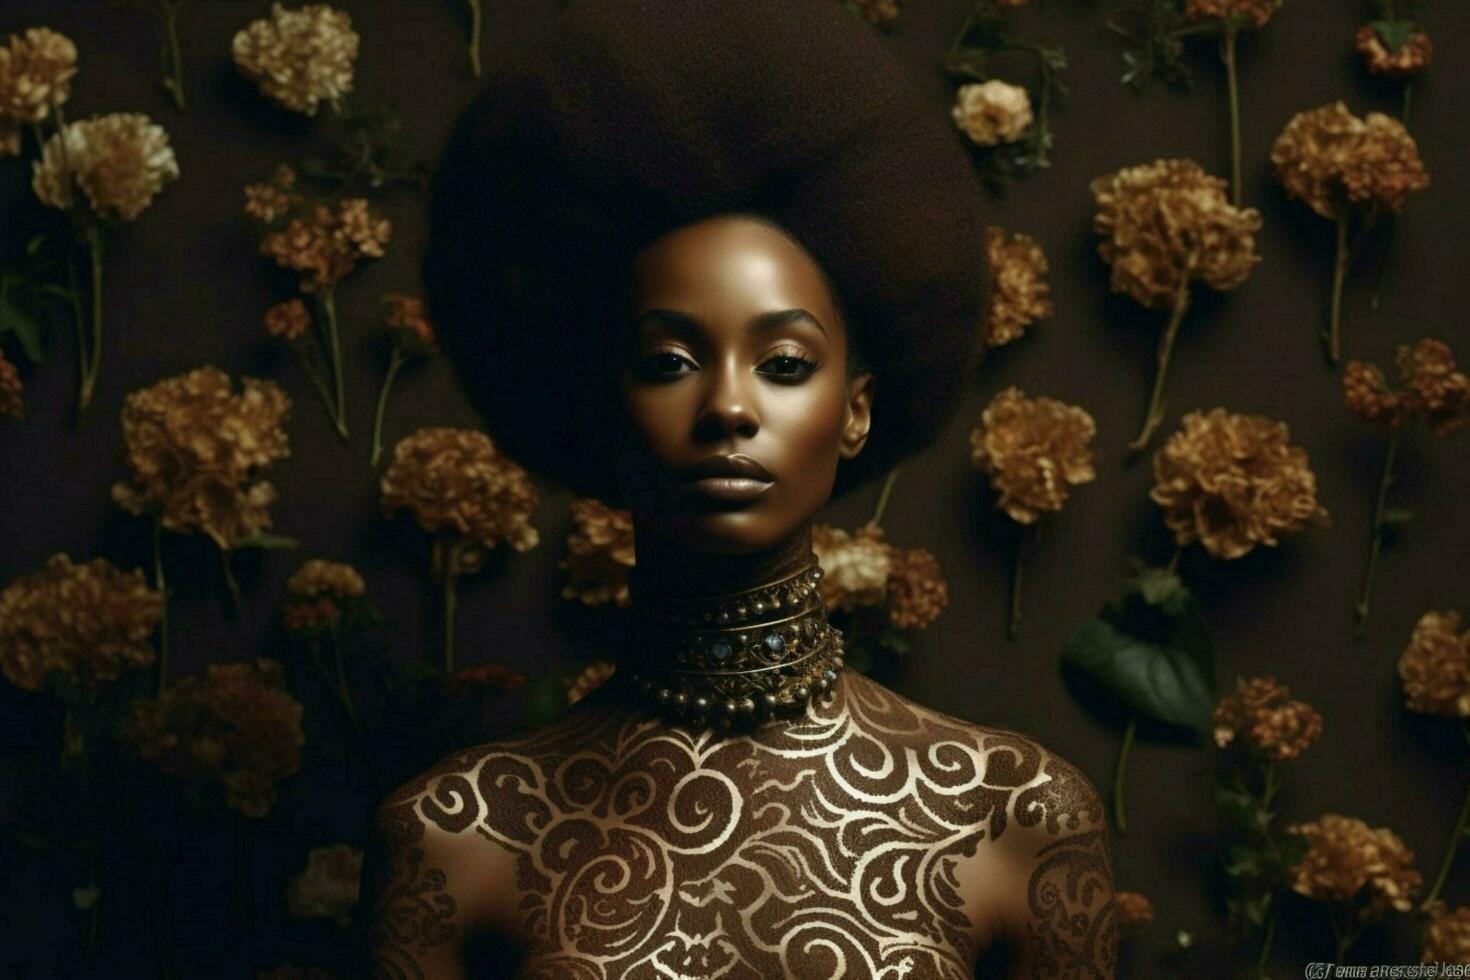 Recognizing the beauty and complexity of Black iden photo